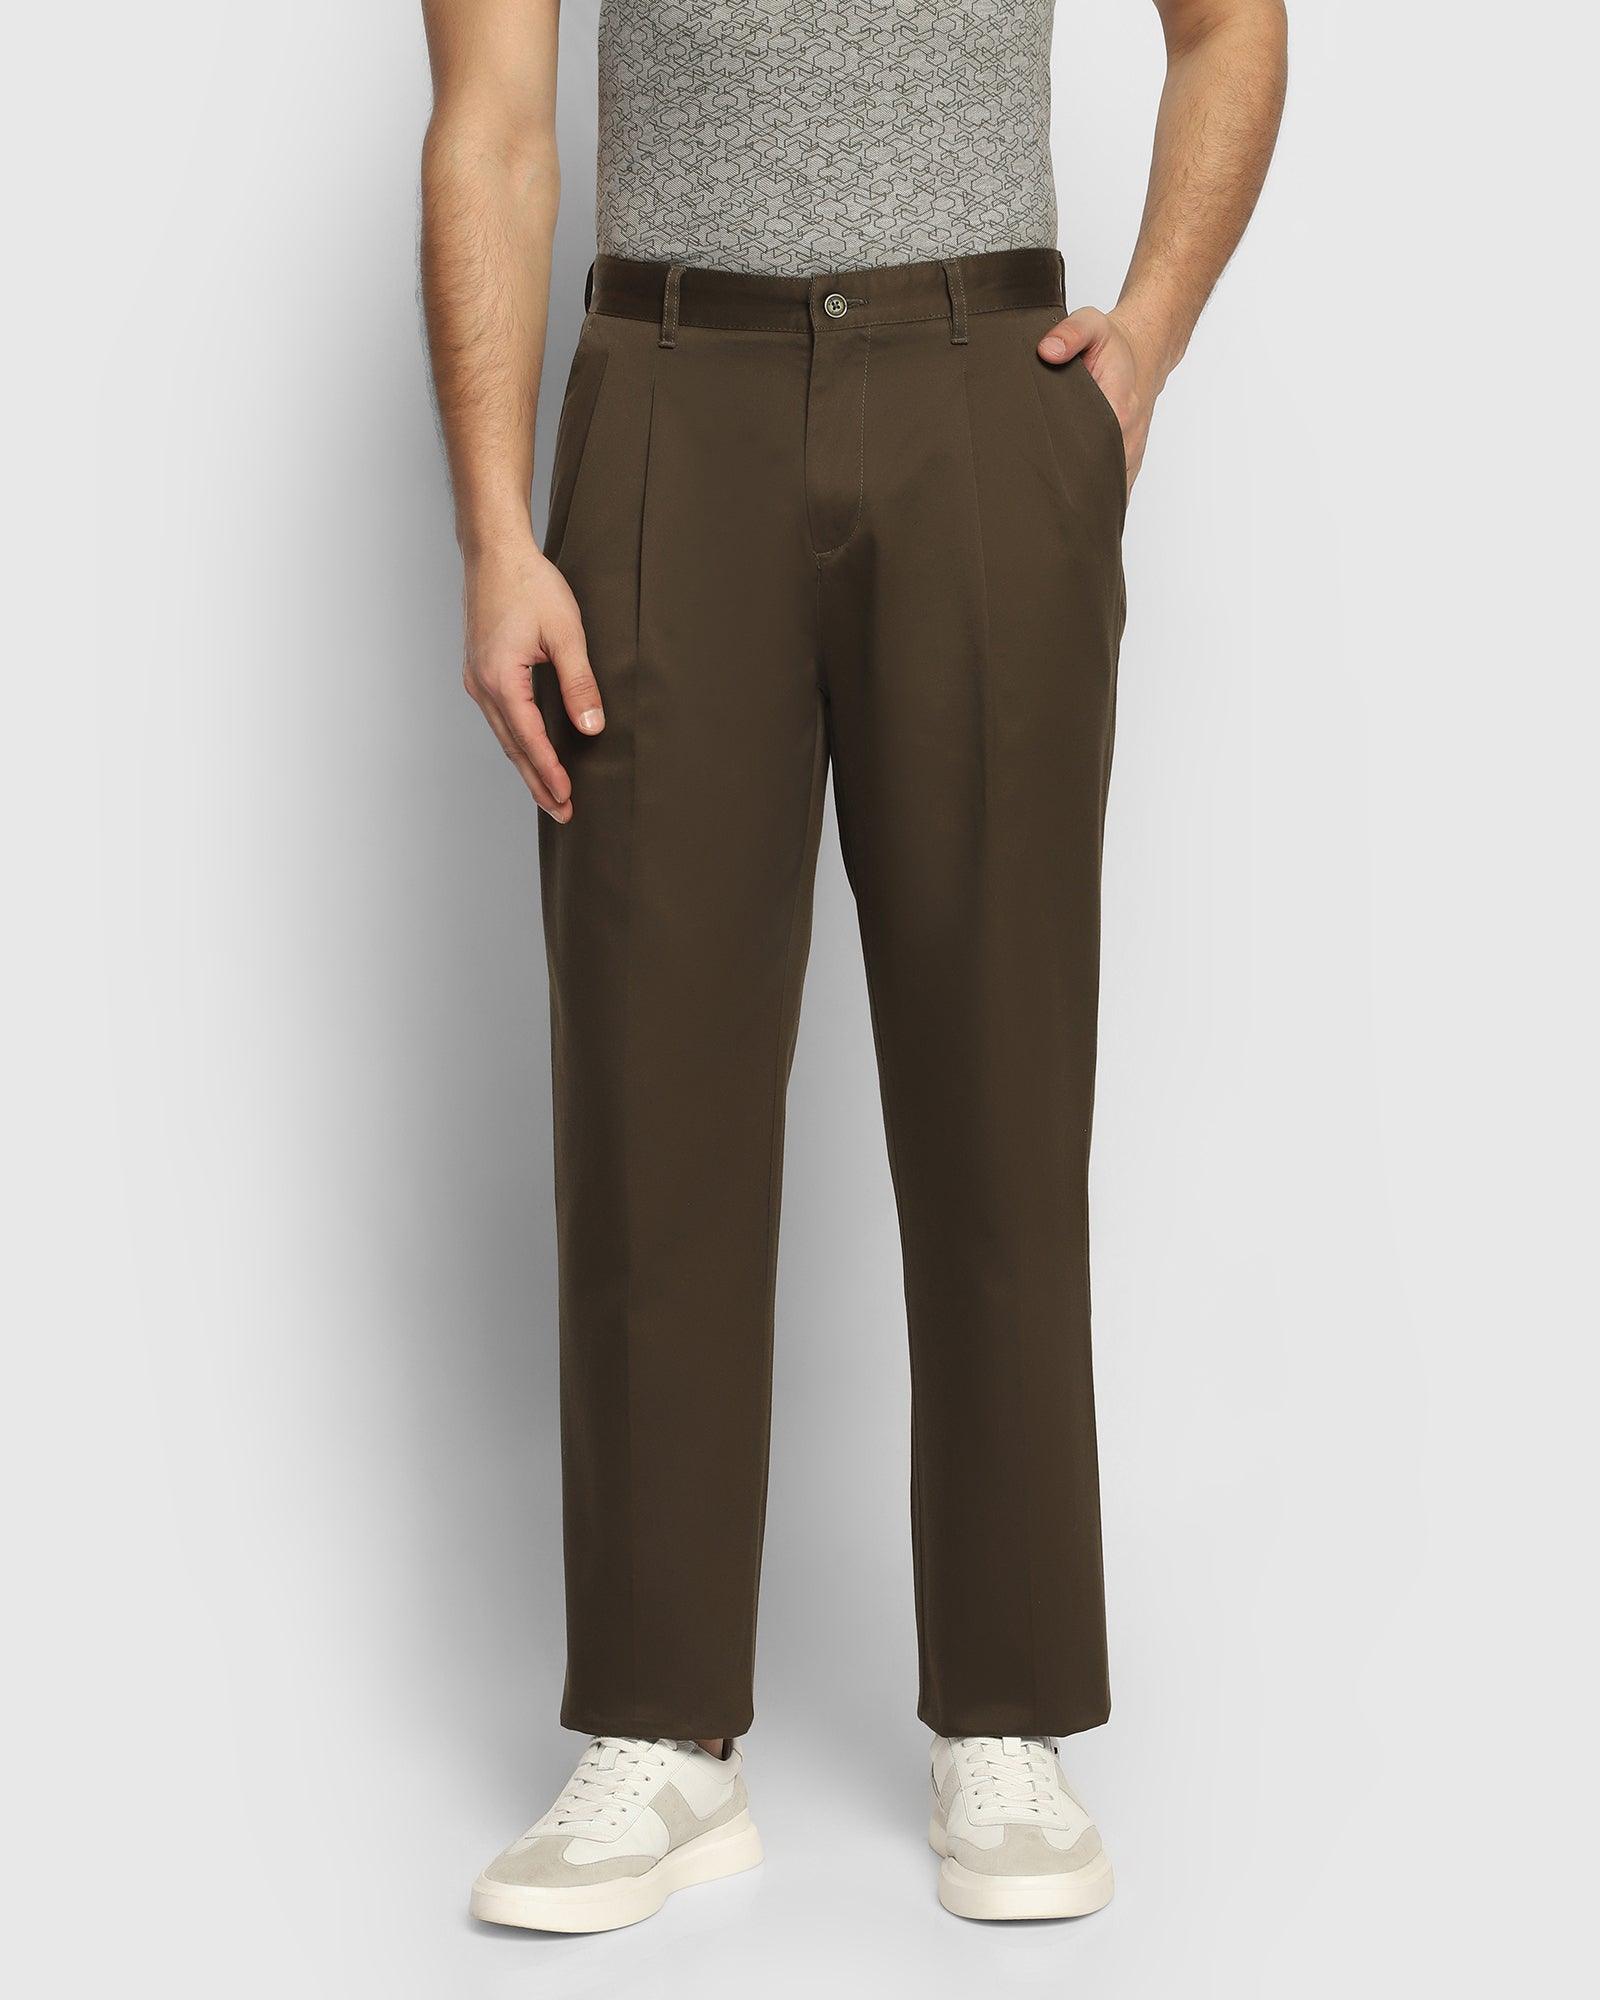 Straight Comfort B-88P Casual Olive Solid Khakis - Knight Rider